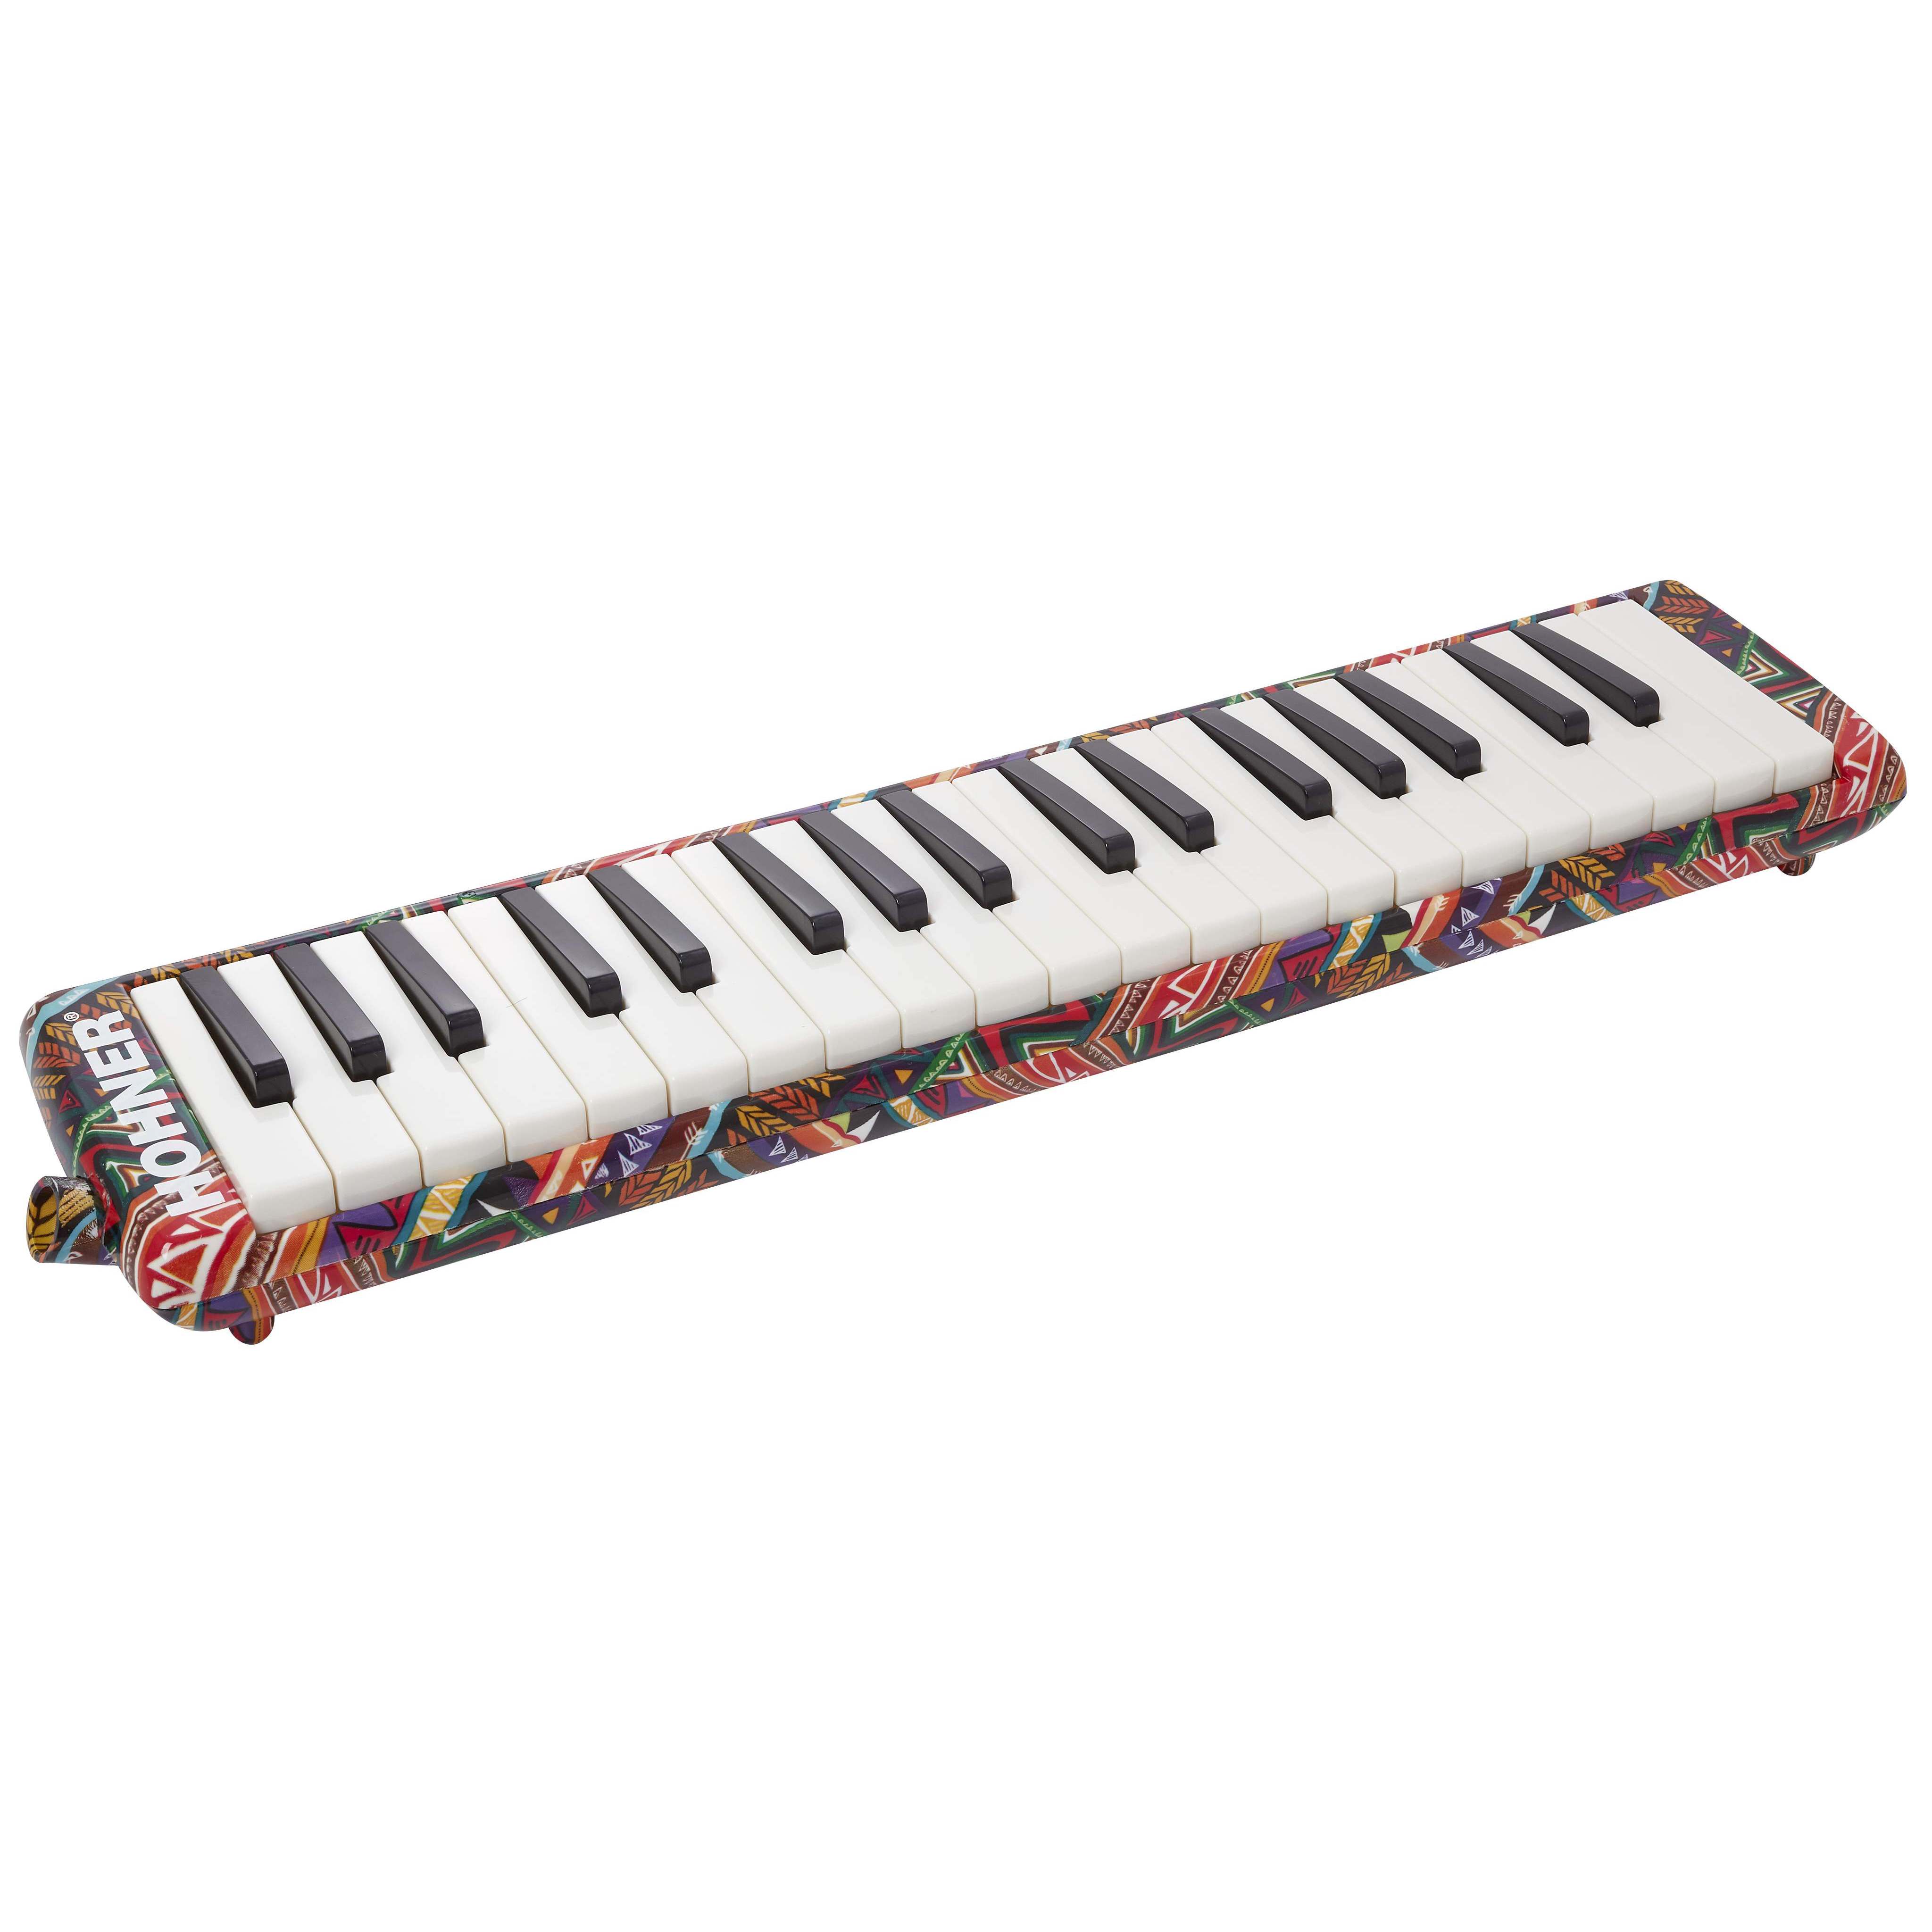 HOHNER 9445 AIRBOARD 37 MELODICA | Obrázok 1 | eplay.sk